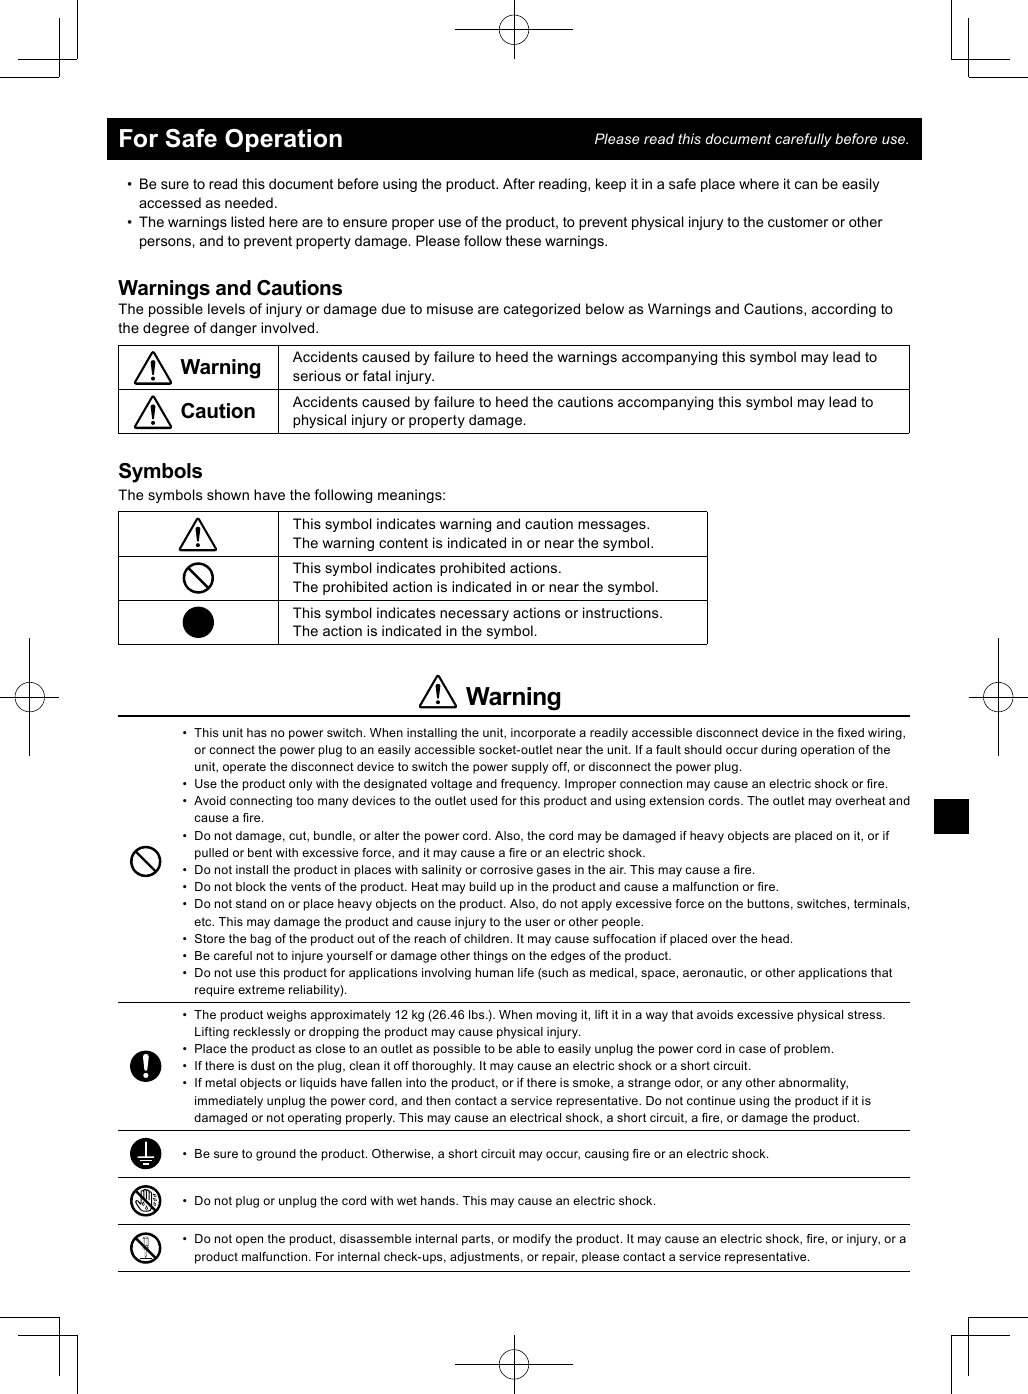 •  Be sure to read this document before using the product. After reading, keep it in a safe place where it can be easily accessed as needed.•  The warnings listed here are to ensure proper use of the product, to prevent physical injury to the customer or other persons, and to prevent property damage. Please follow these warnings.Warnings and CautionsThe possible levels of injury or damage due to misuse are categorized below as Warnings and Cautions, according to the degree of danger involved.Warning Accidents caused by failure to heed the warnings accompanying this symbol may lead to serious or fatal injury.Caution Accidents caused by failure to heed the cautions accompanying this symbol may lead to physical injury or property damage.SymbolsThe symbols shown have the following meanings:This symbol indicates warning and caution messages.The warning content is indicated in or near the symbol.This symbol indicates prohibited actions.The prohibited action is indicated in or near the symbol.This symbol indicates necessary actions or instructions.The action is indicated in the symbol.Warning•  This unit has no power switch. When installing the unit, incorporate a readily accessible disconnect device in the ﬁ xed wiring, or connect the power plug to an easily accessible socket-outlet near the unit. If a fault should occur during operation of the unit, operate the disconnect device to switch the power supply off, or disconnect the power plug.•  Use the product only with the designated voltage and frequency. Improper connection may cause an electric shock or ﬁ re. •  Avoid connecting too many devices to the outlet used for this product and using extension cords. The outlet may overheat and cause a ﬁ re. •  Do not damage, cut, bundle, or alter the power cord. Also, the cord may be damaged if heavy objects are placed on it, or if pulled or bent with excessive force, and it may cause a ﬁ re or an electric shock.•  Do not install the product in places with salinity or corrosive gases in the air. This may cause a ﬁ re. •  Do not block the vents of the product. Heat may build up in the product and cause a malfunction or ﬁ re. •  Do not stand on or place heavy objects on the product. Also, do not apply excessive force on the buttons, switches, terminals, etc. This may damage the product and cause injury to the user or other people.•  Store the bag of the product out of the reach of children. It may cause suffocation if placed over the head. •  Be careful not to injure yourself or damage other things on the edges of the product. •  Do not use this product for applications involving human life (such as medical, space, aeronautic, or other applications that require extreme reliability).•  The product weighs approximately 12 kg (26.46 lbs.). When moving it, lift it in a way that avoids excessive physical stress. Lifting recklessly or dropping the product may cause physical injury.•  Place the product as close to an outlet as possible to be able to easily unplug the power cord in case of problem. •  If there is dust on the plug, clean it off thoroughly. It may cause an electric shock or a short circuit. •  If metal objects or liquids have fallen into the product, or if there is smoke, a strange odor, or any other abnormality, immediately unplug the power cord, and then contact a service representative. Do not continue using the product if it is damaged or not operating properly. This may cause an electrical shock, a short circuit, a ﬁ re, or damage the product.•  Be sure to ground the product. Otherwise, a short circuit may occur, causing ﬁ re or an electric shock.•  Do not plug or unplug the cord with wet hands. This may cause an electric shock.•  Do not open the product, disassemble internal parts, or modify the product. It may cause an electric shock, ﬁ re, or injury, or a product malfunction. For internal check-ups, adjustments, or repair, please contact a service representative.For Safe Operation Please read this document carefully before use.